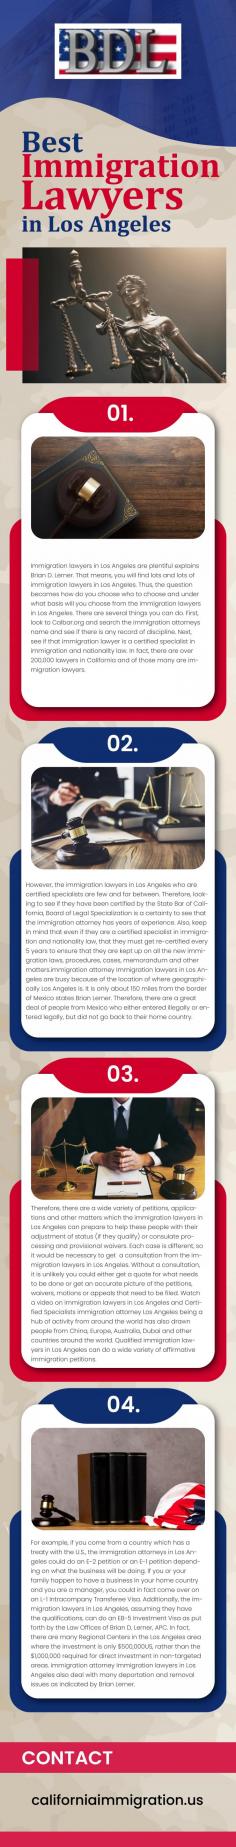 The immigration attorney Los Angeles will also discuss the possibility of the EB-4 petitions which cover different types of petitions such as battered spouses or religious worker petitions shares the best immigration lawyers in Los Angeles. The battered spouse petitions can be for either a male or female. Most the time it is a female, but on occasion, the immigration lawyer Los Angeles CA can explain why a male might be able to apply for VAWA due to severe emotional distress and sometimes even physical abuse will be shown.
For more info visit here: https://californiaimmigration.us/
